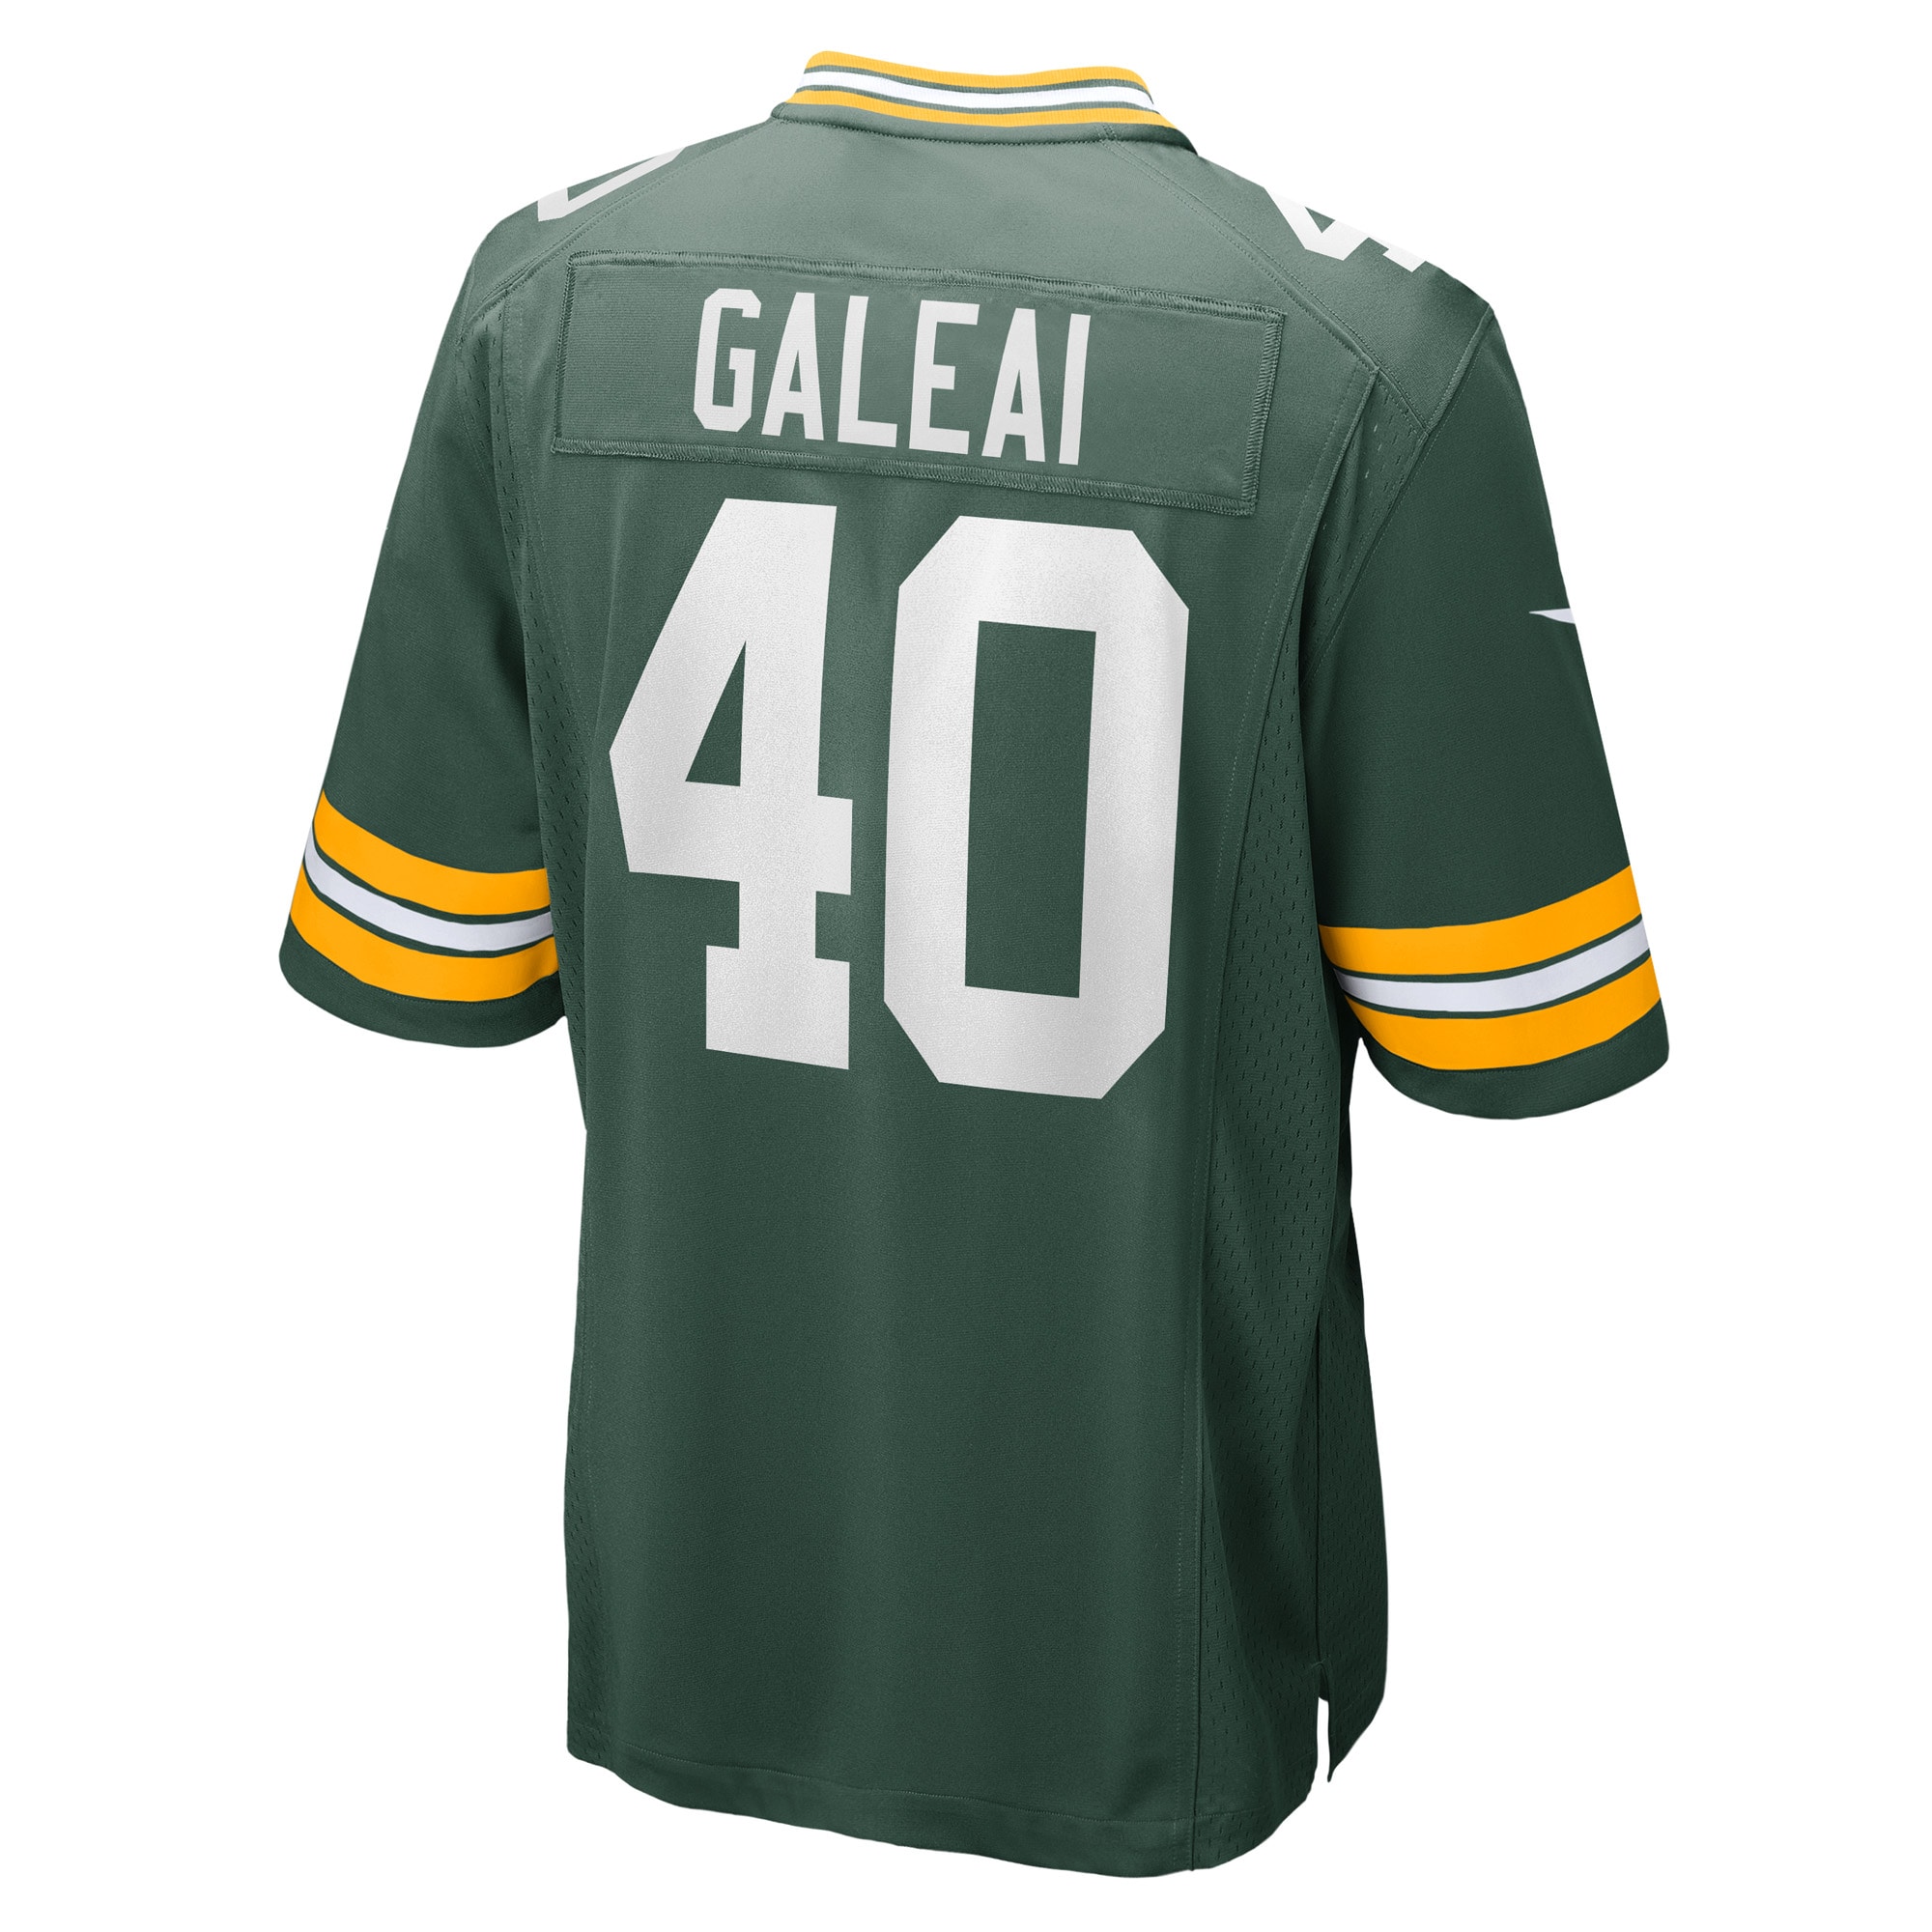 Men's Green Bay Packers Jerseys Green Tipa Galeai Team Game Player Style